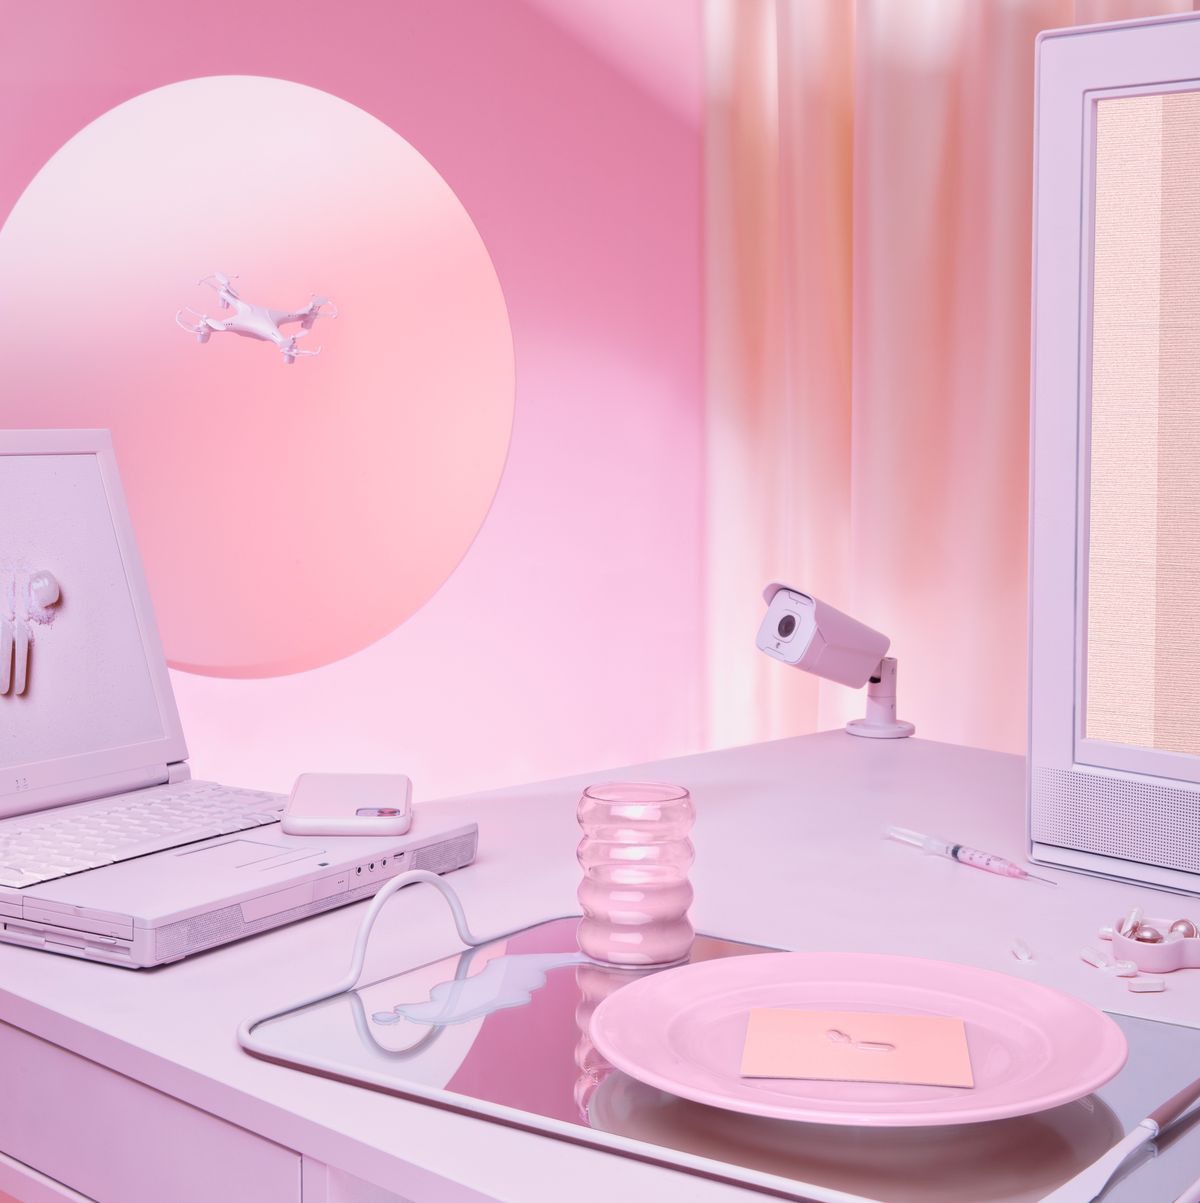 Do more of what you love, Pastel pink aesthetic